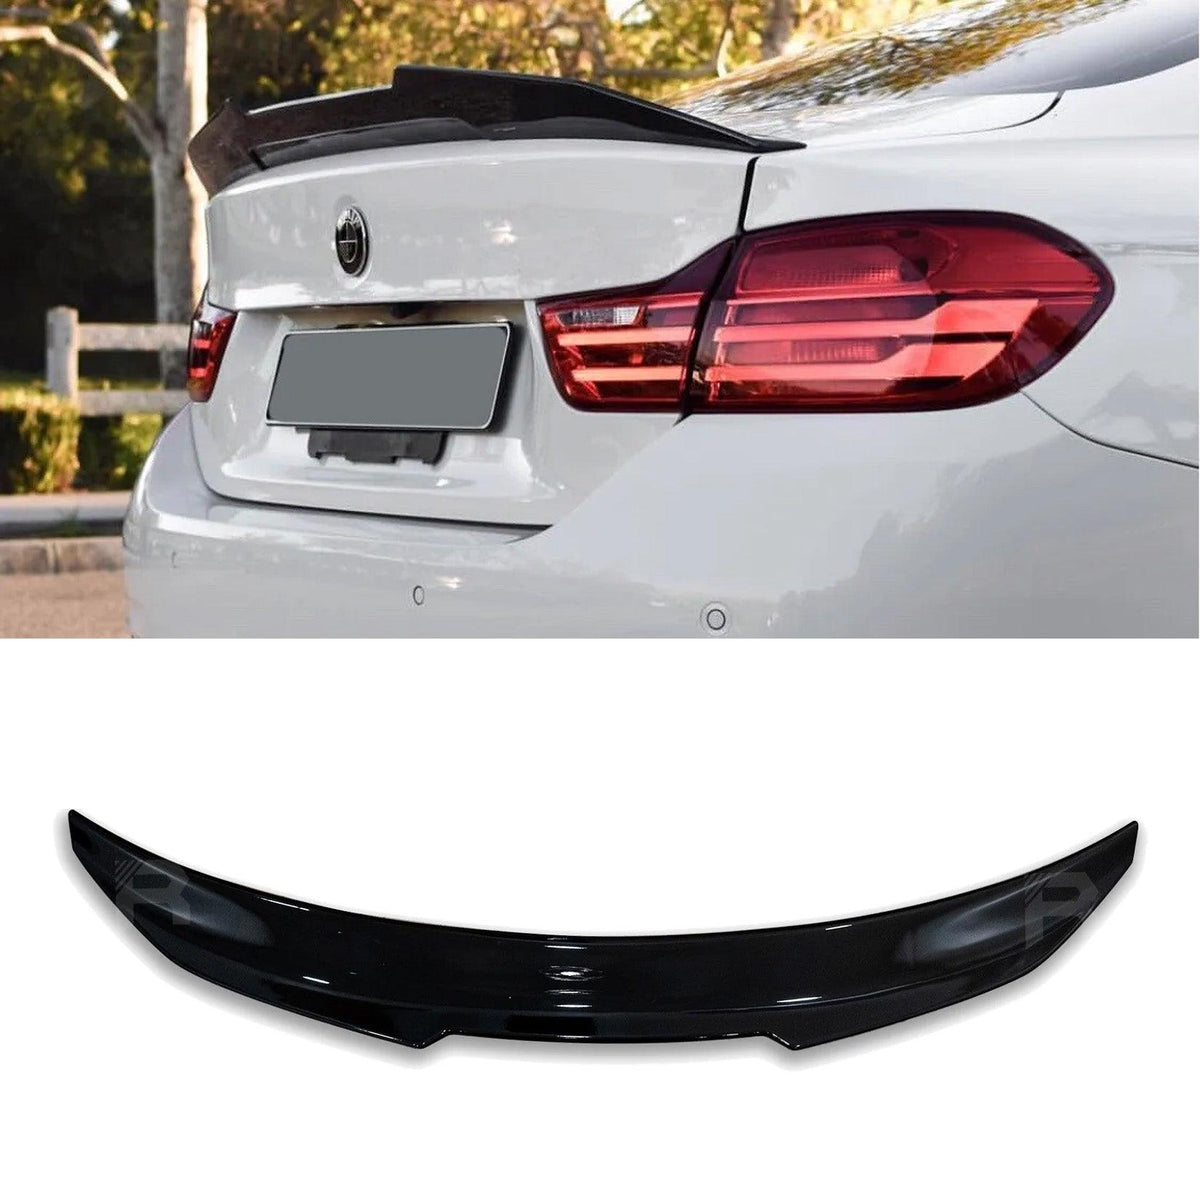 BMW 3 SERIES F30 2012-2018 PSM STYLE REAR BOOT SPOILER IN GLOSS BLACK - RisperStyling